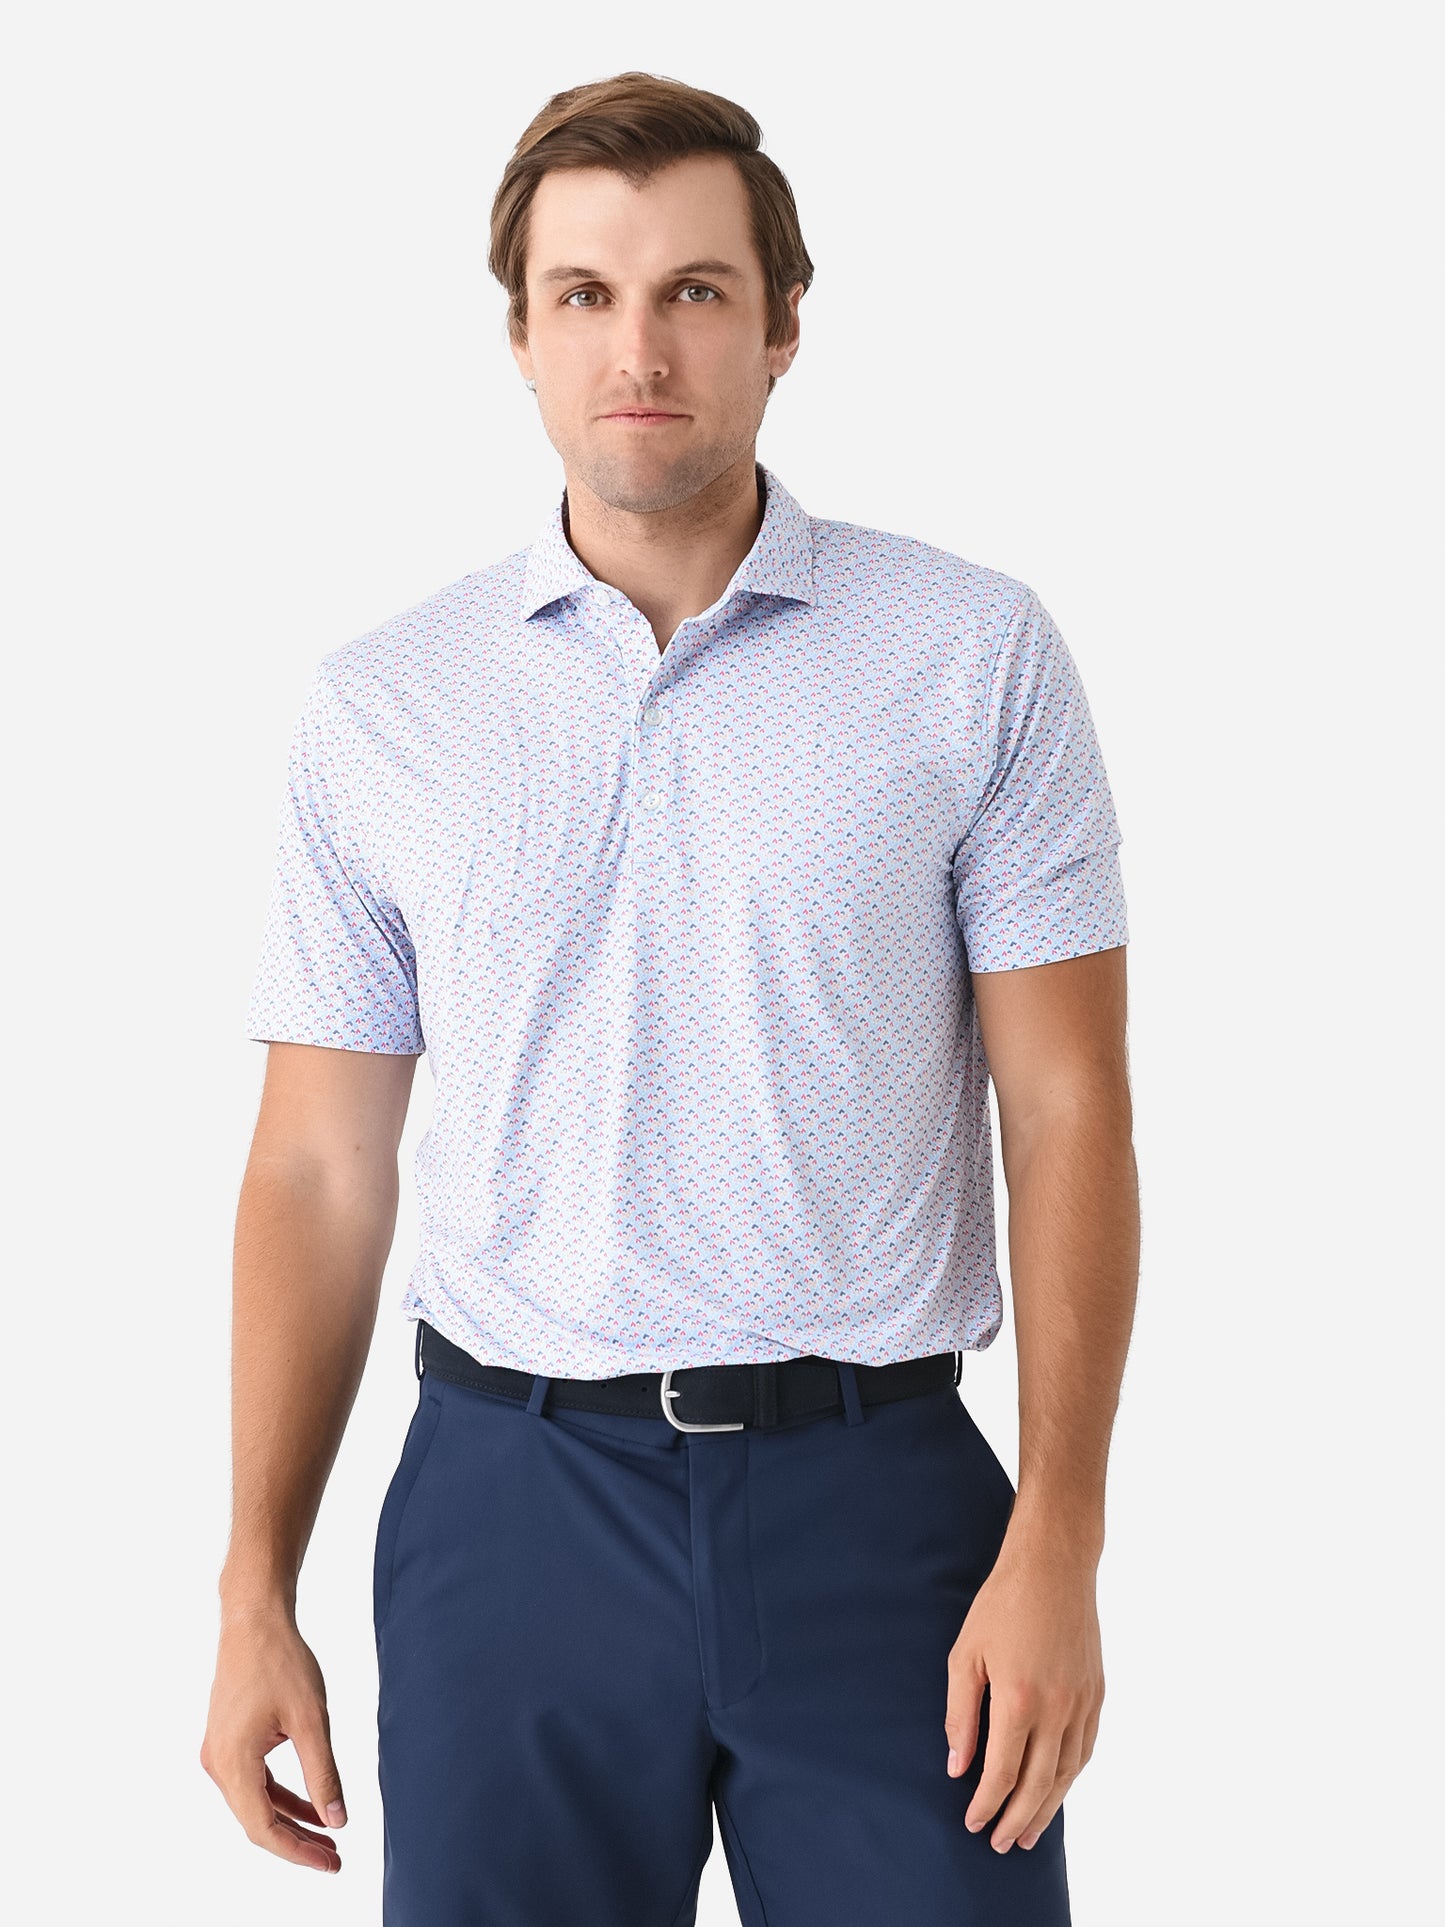 Johnnie-O Men's Forbes Featherweight Printed Polo